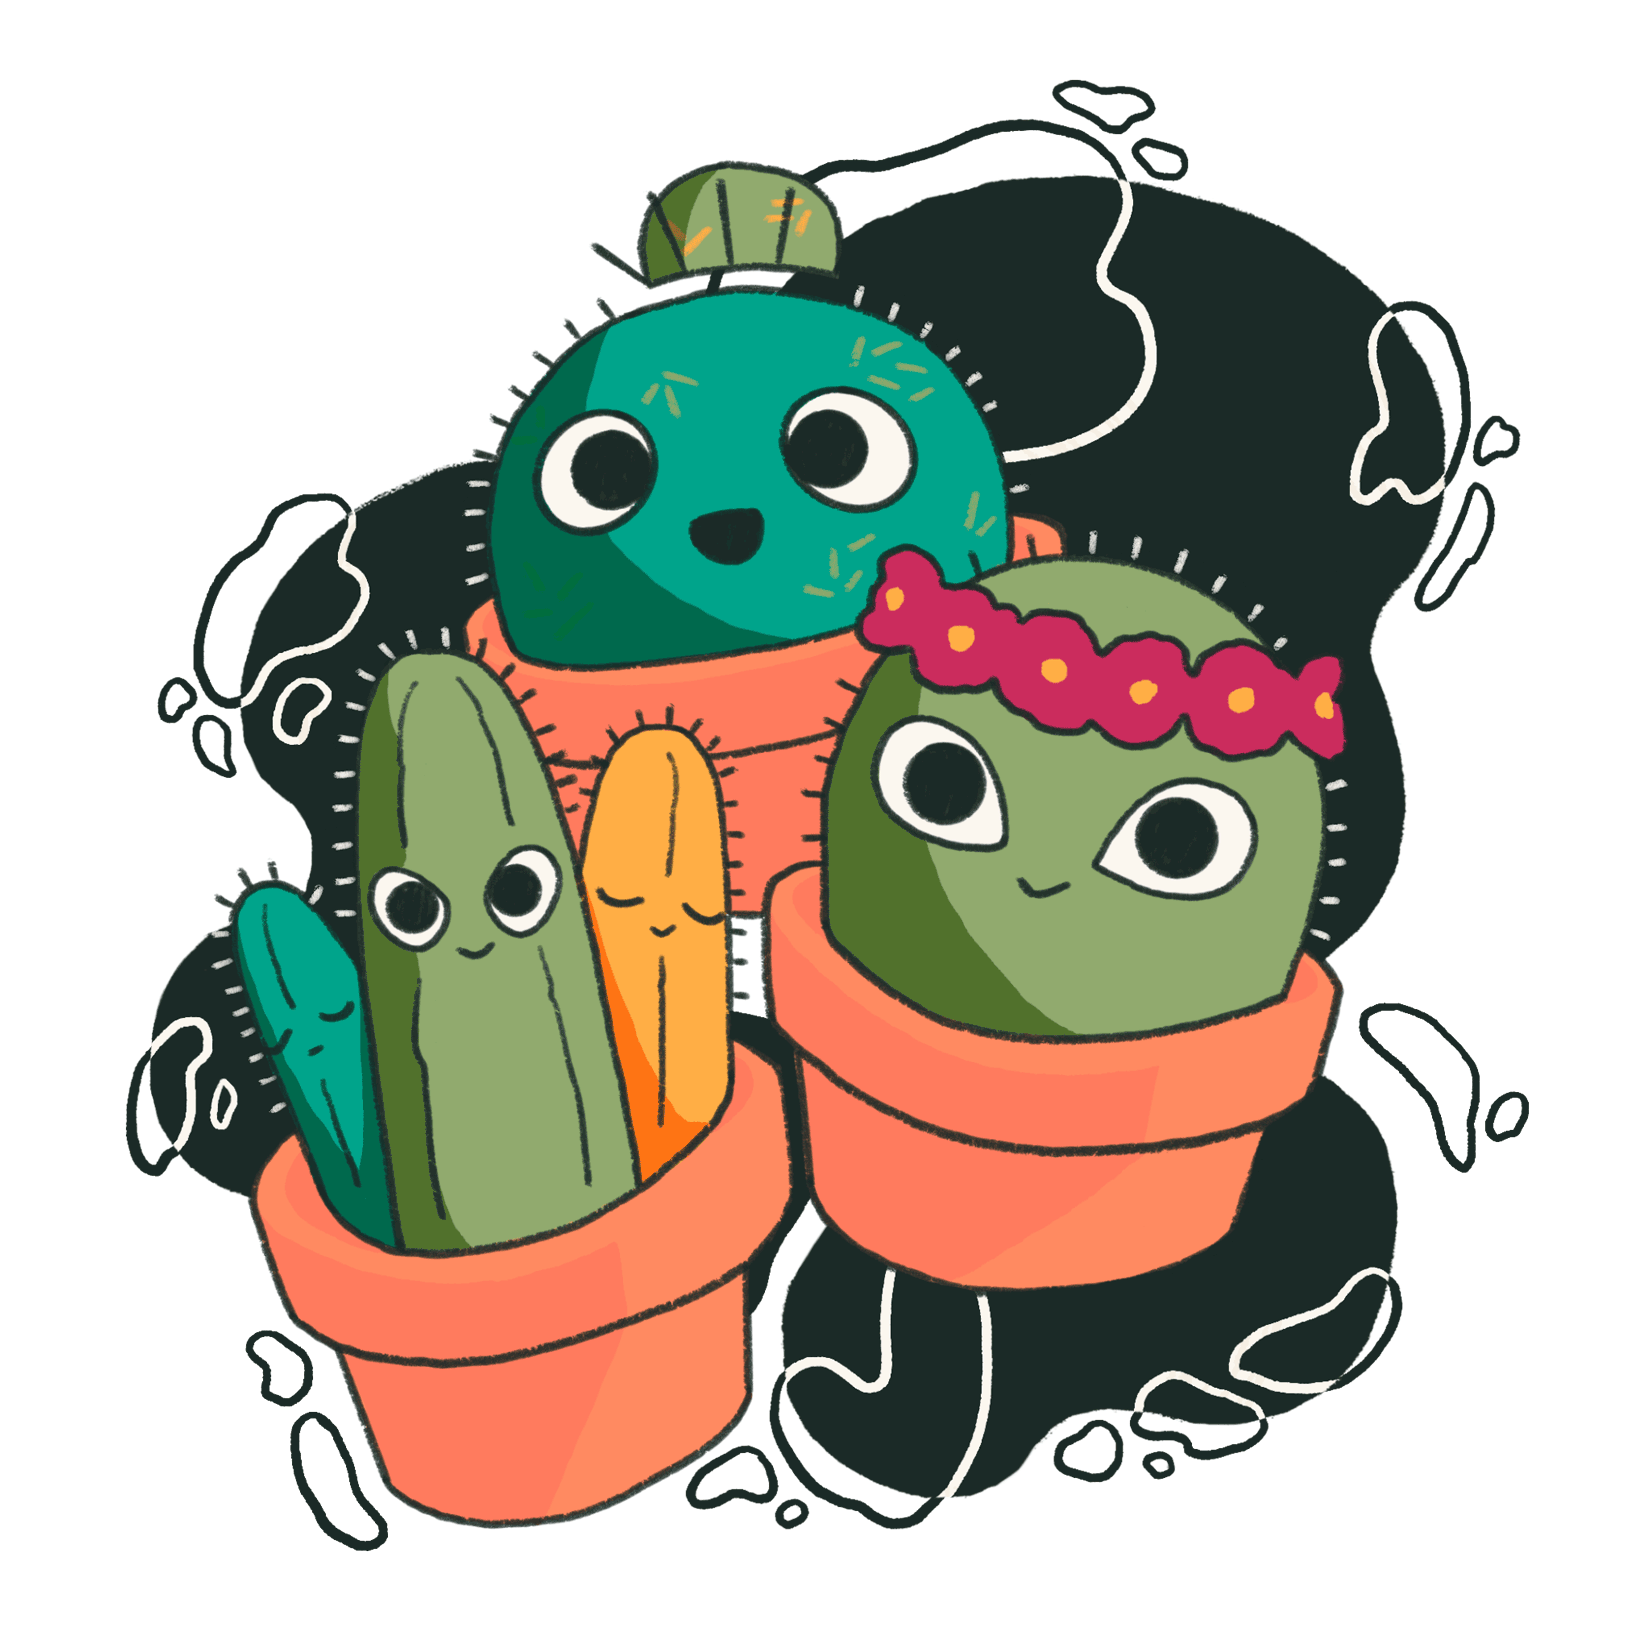 Three cactus characters smiling happily while floating among dark green wavy shapes.